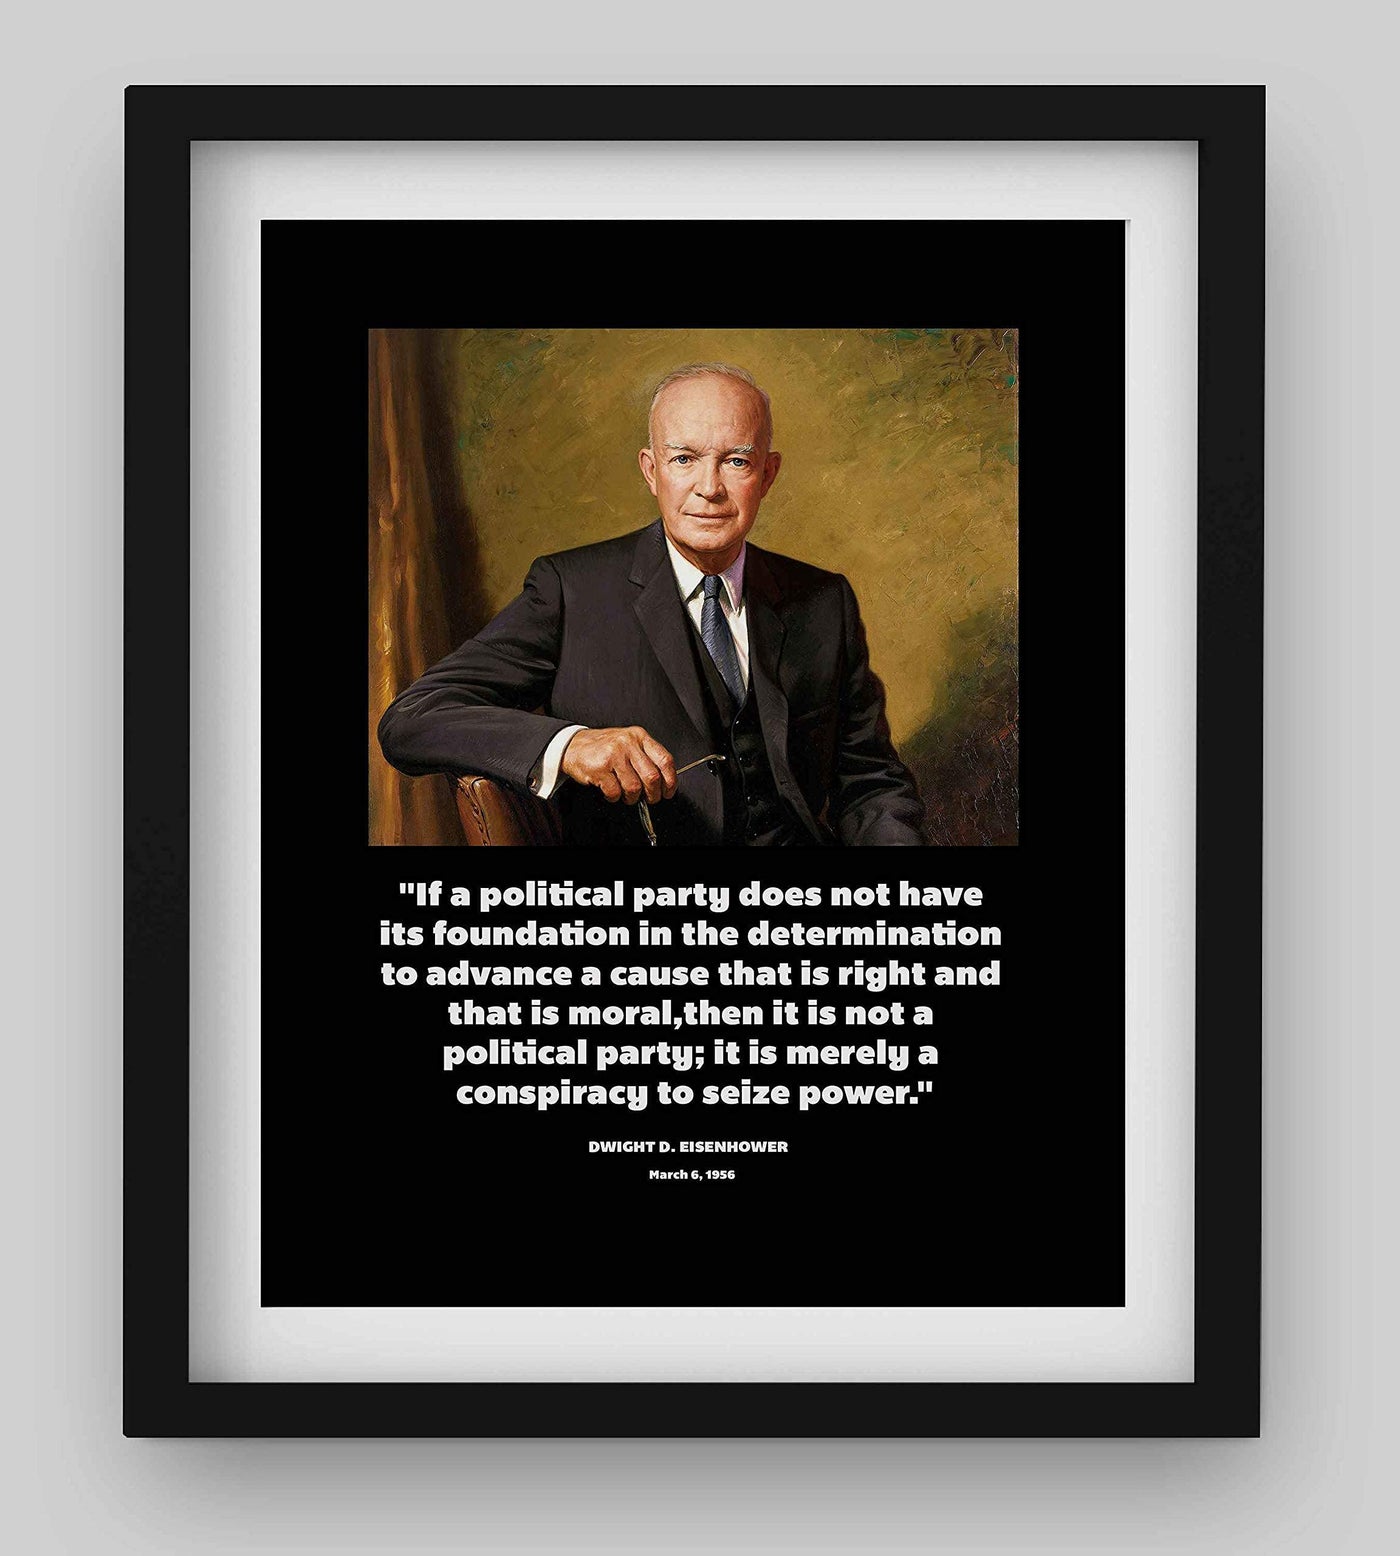 Political Party Conspiracy- Dwight D. Eisenhower Quotes- 8 x 10" Presidential Portrait Wall Art Print-Ready to Frame. Home-Office-School-Library D?cor. Great Gift for Political Minds!